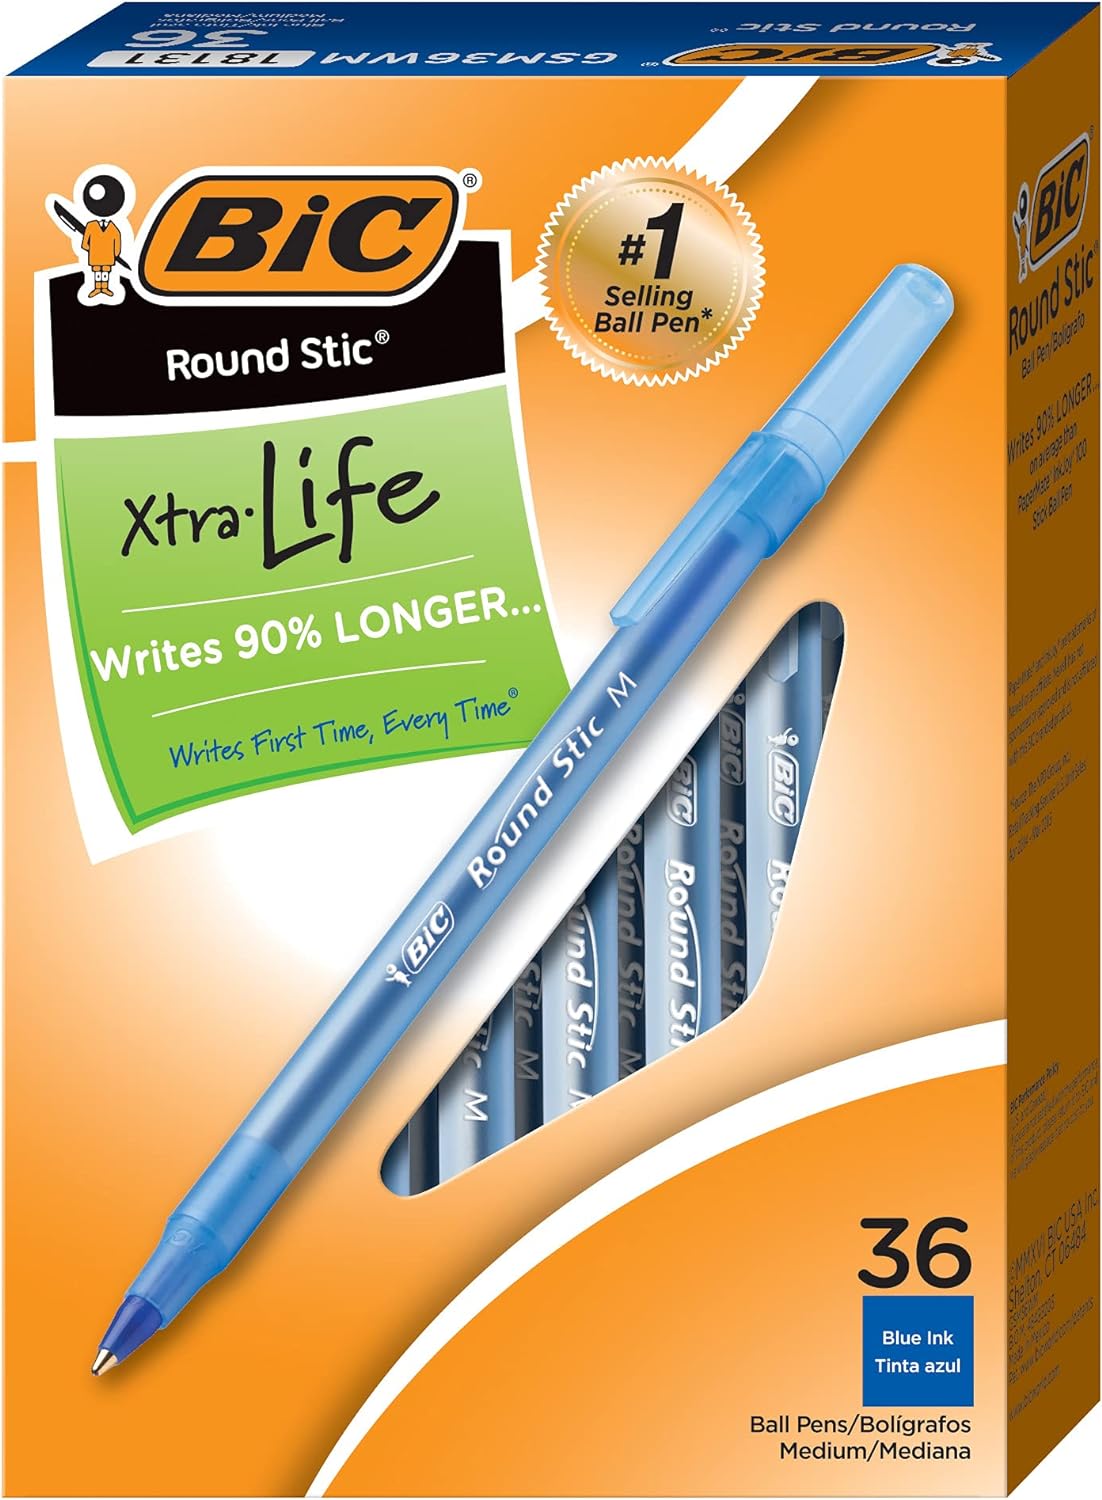 BIC Round Stic Xtra Life Blue Ballpoint Pens, Medium Point (1.0mm), 36-Count Pack of Bulk Pens, Flexible Round Barrel for Writing Comfort, No. 1 Selling Ballpoint Pens